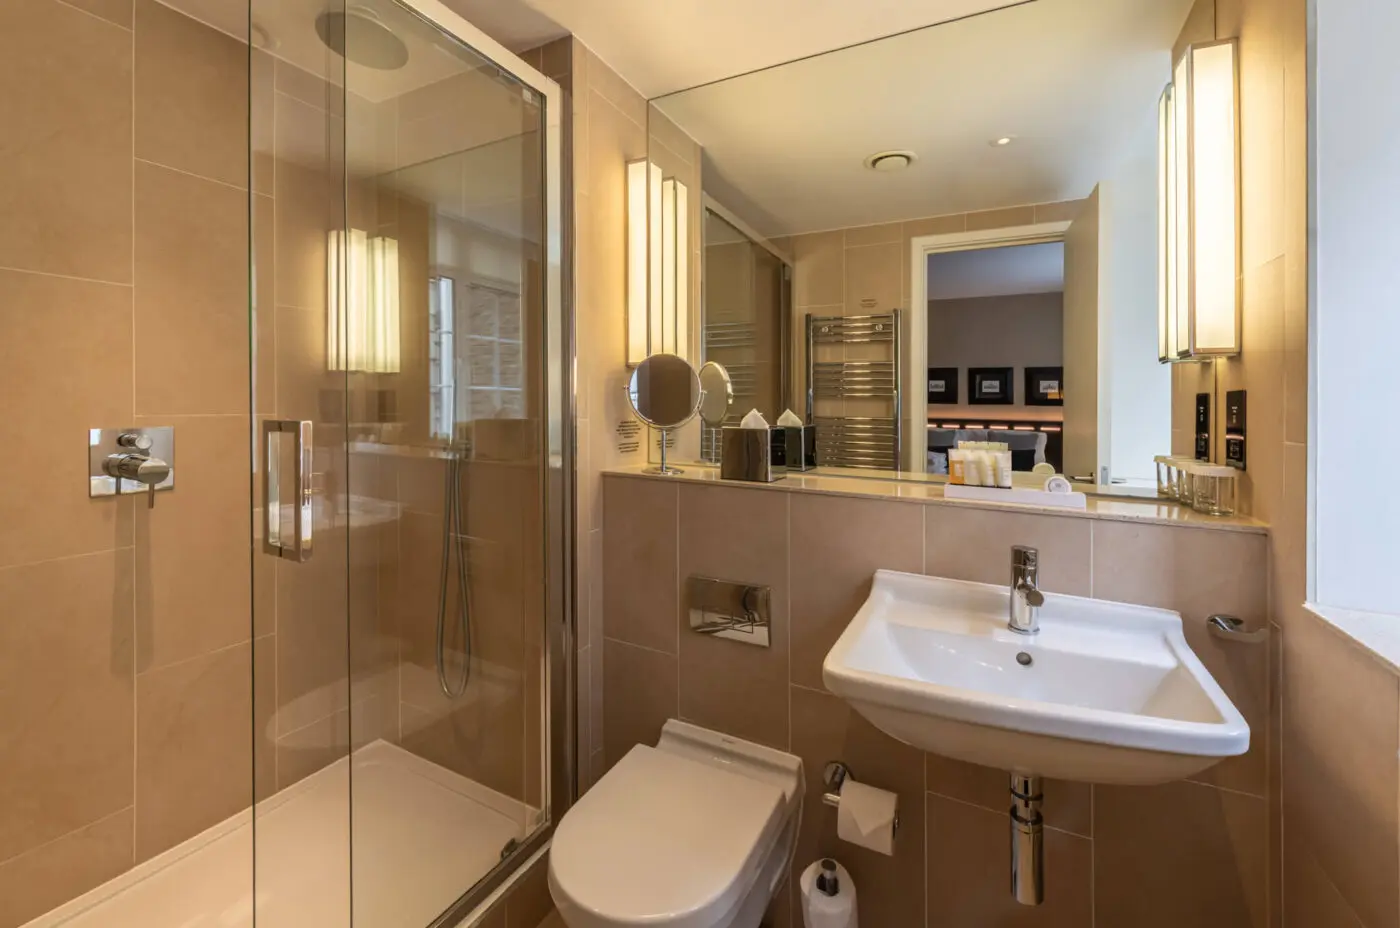 A large bathroom with a walk-in shower, located in Victoria.